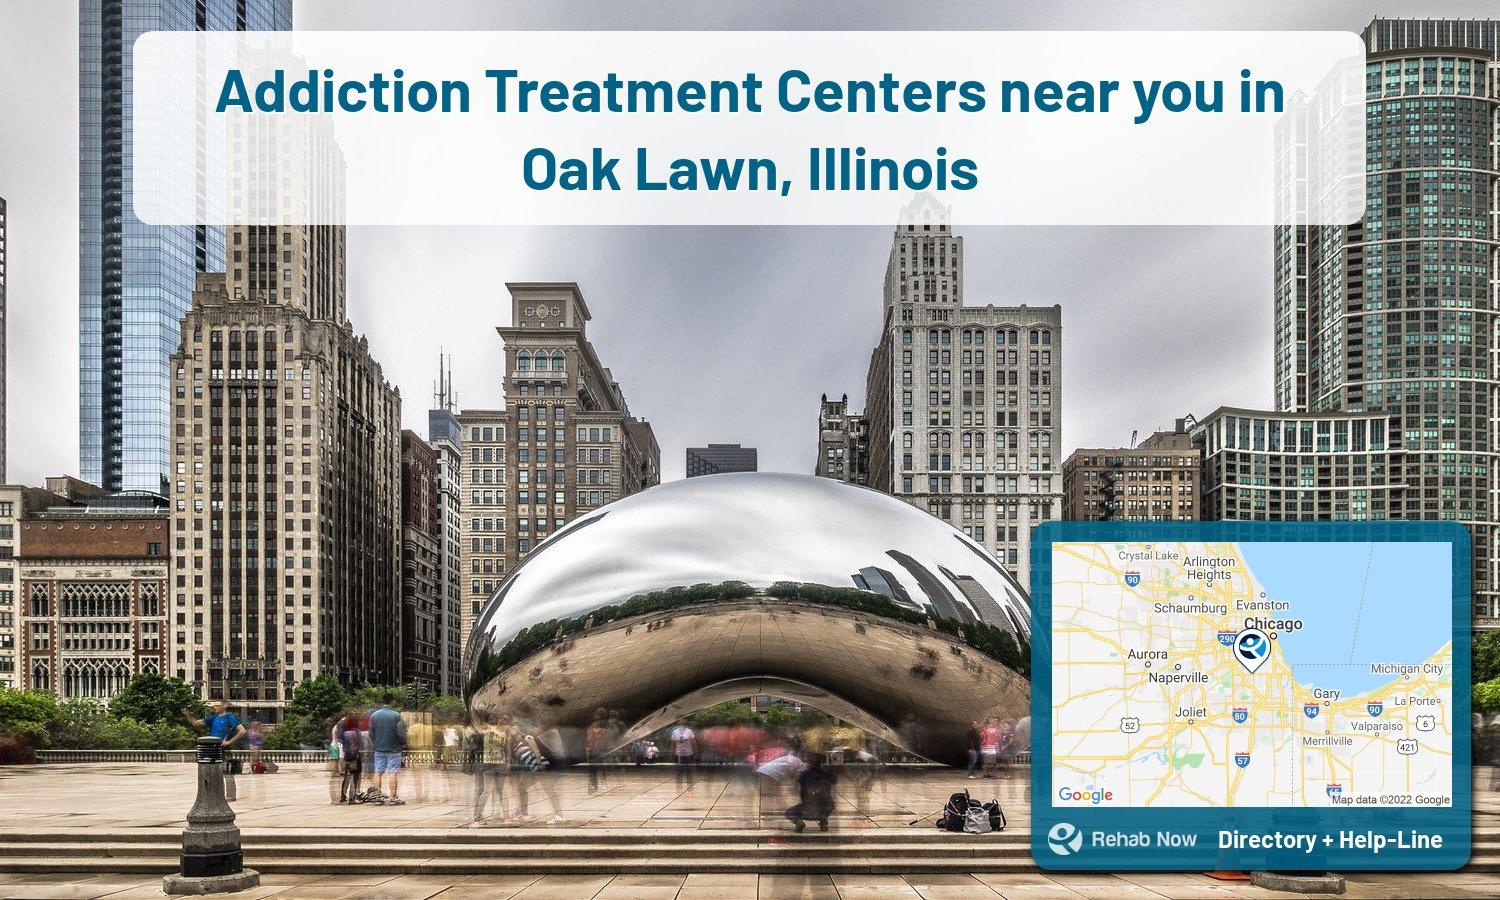 Oak Lawn, IL Treatment Centers. Find drug rehab in Oak Lawn, Illinois, or detox and treatment programs. Get the right help now!